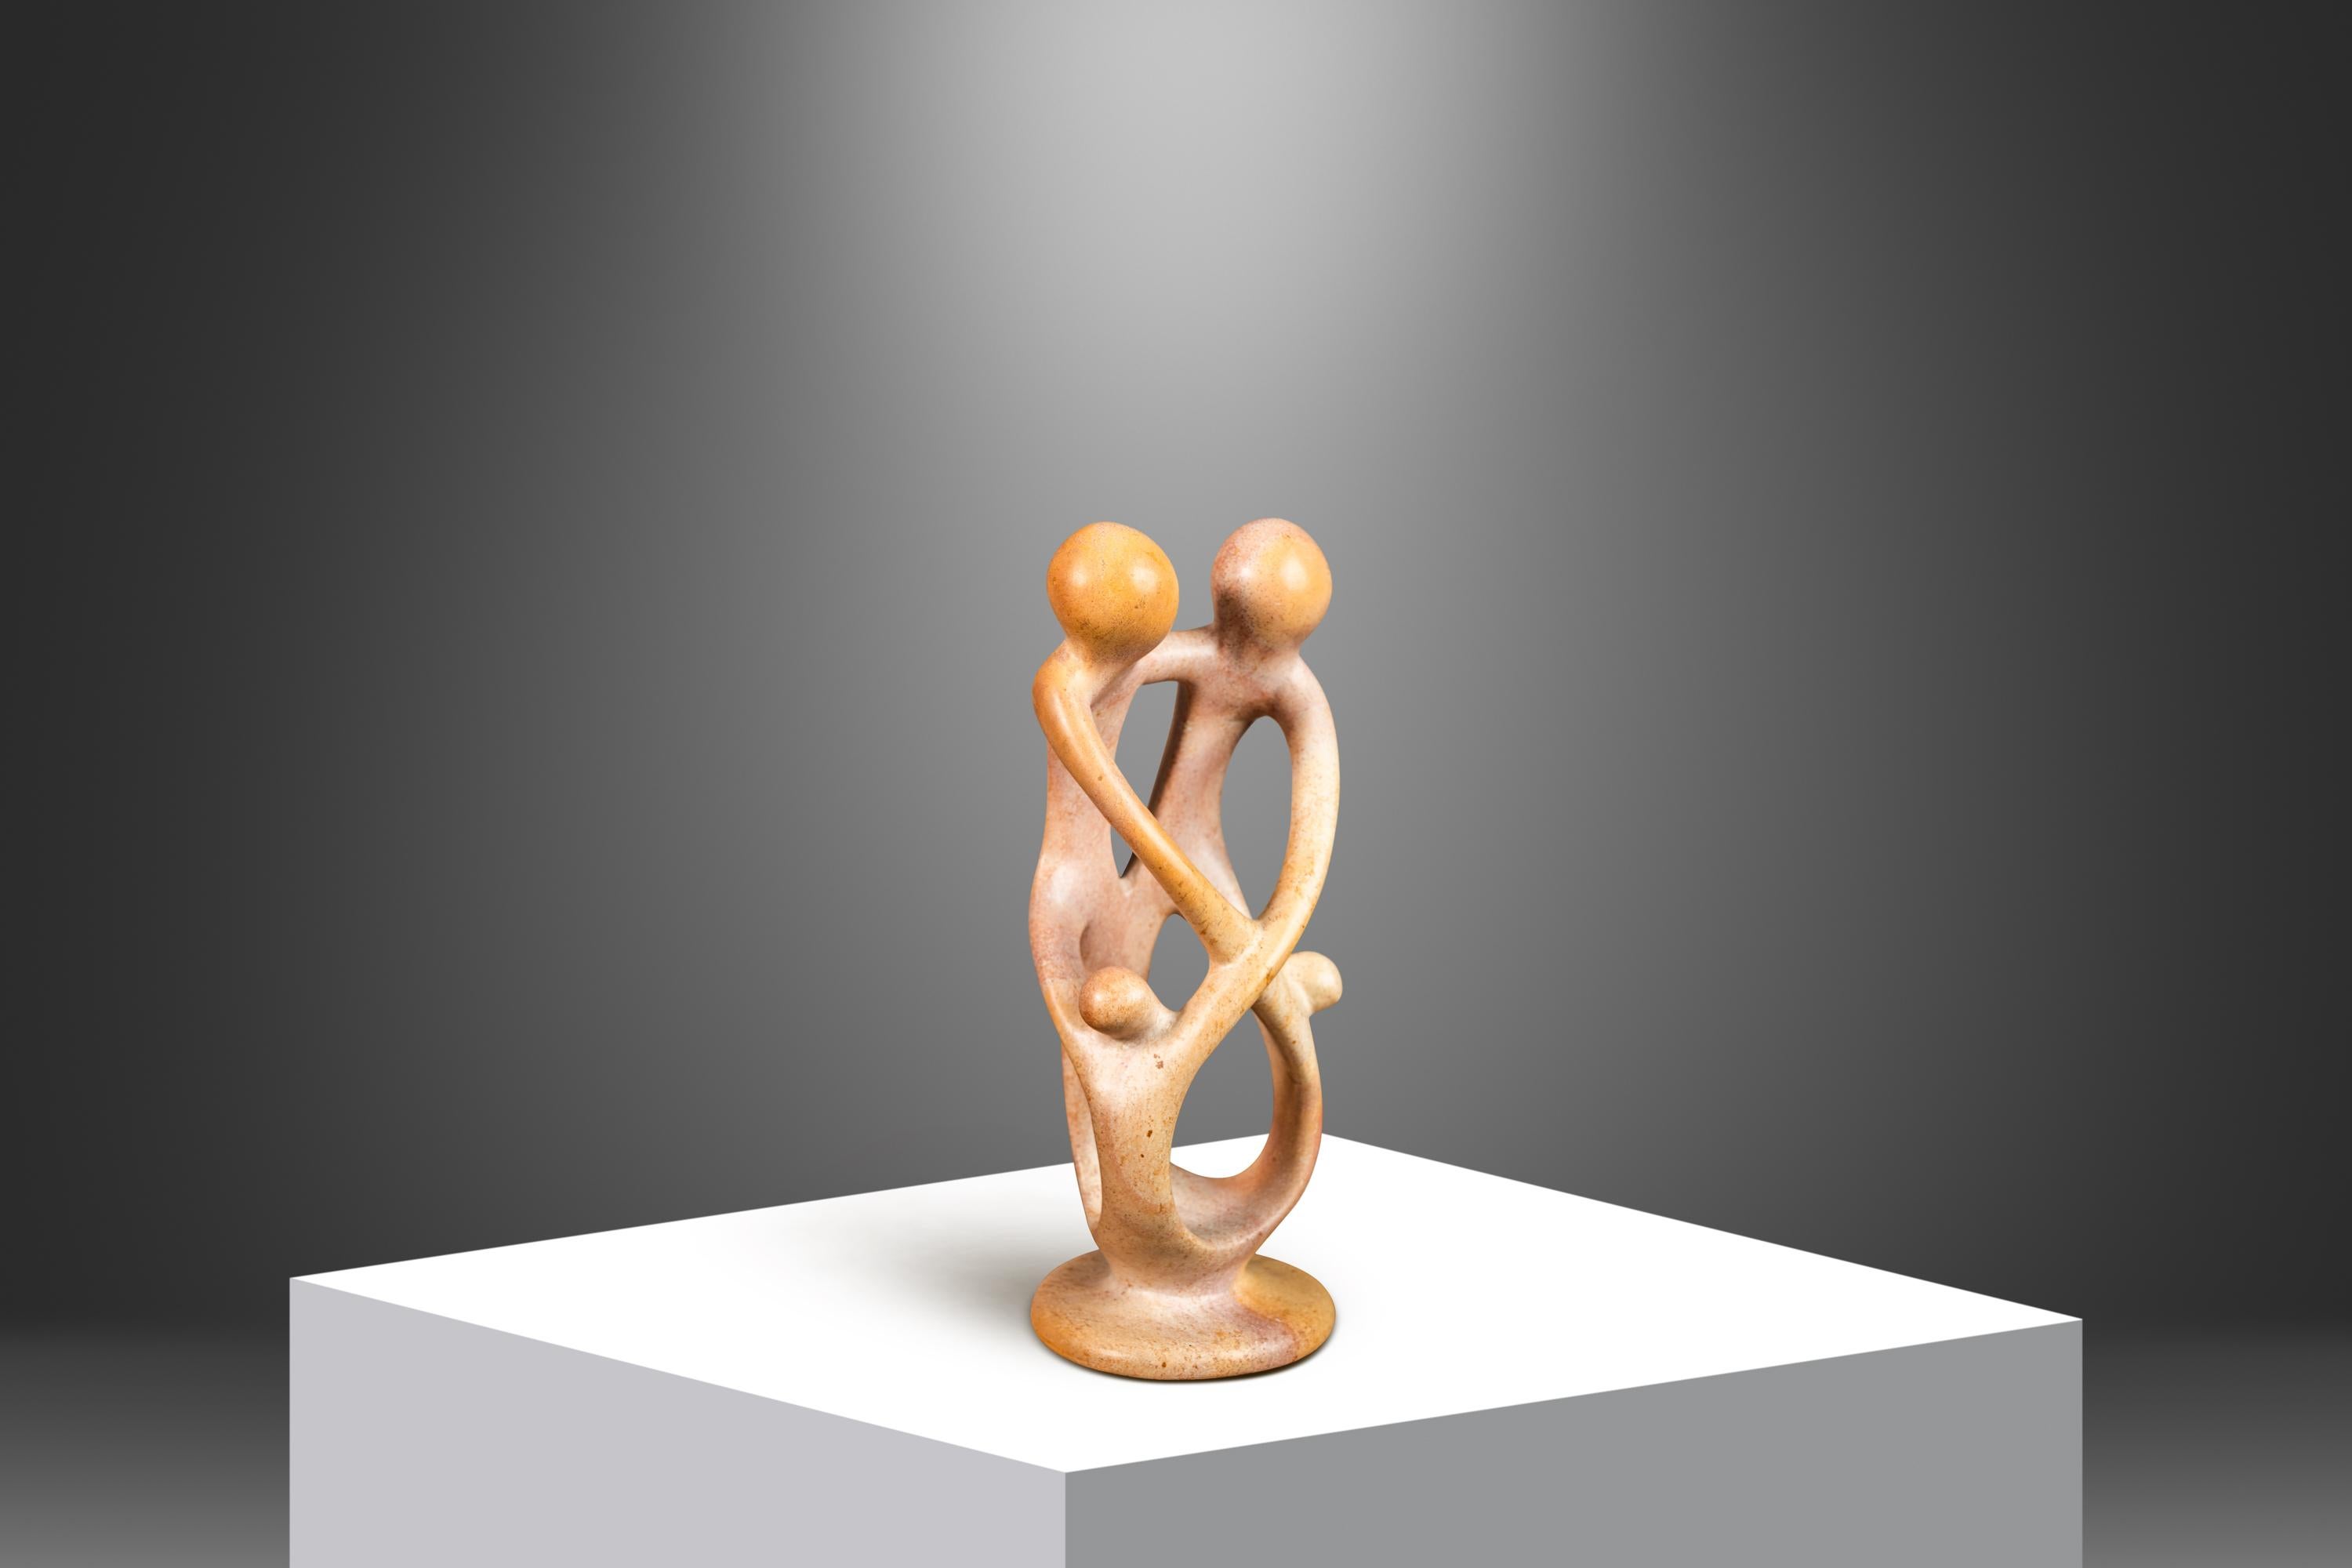 Introducing a heart-warming abstract sculpture depicting parents with a child in embrace. Hand-carved in solid marble by a Kenyan artisan this exquisite, petite sculpture is the perfect gift to new parents or for collectors searching for a unique,